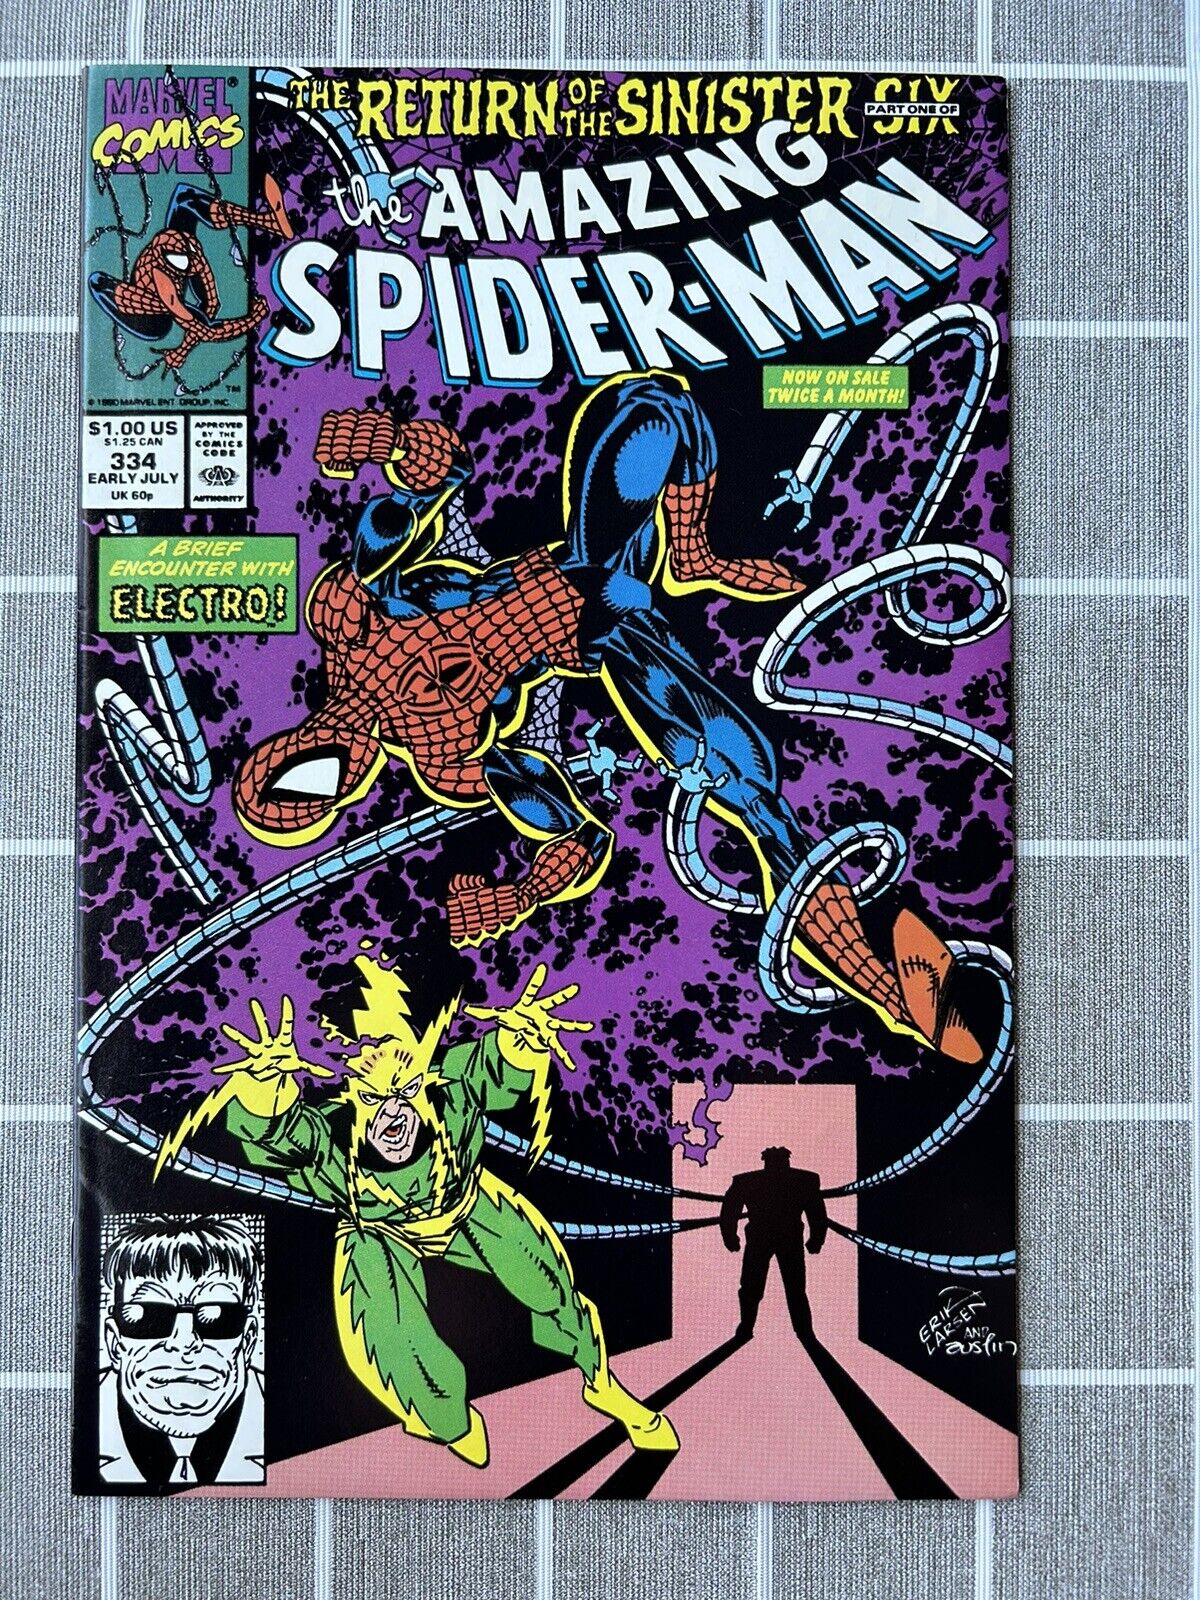 Amazing Spider-Man #334 NM Never Opened! Sinister Six, Electro & Dr Oc Cover